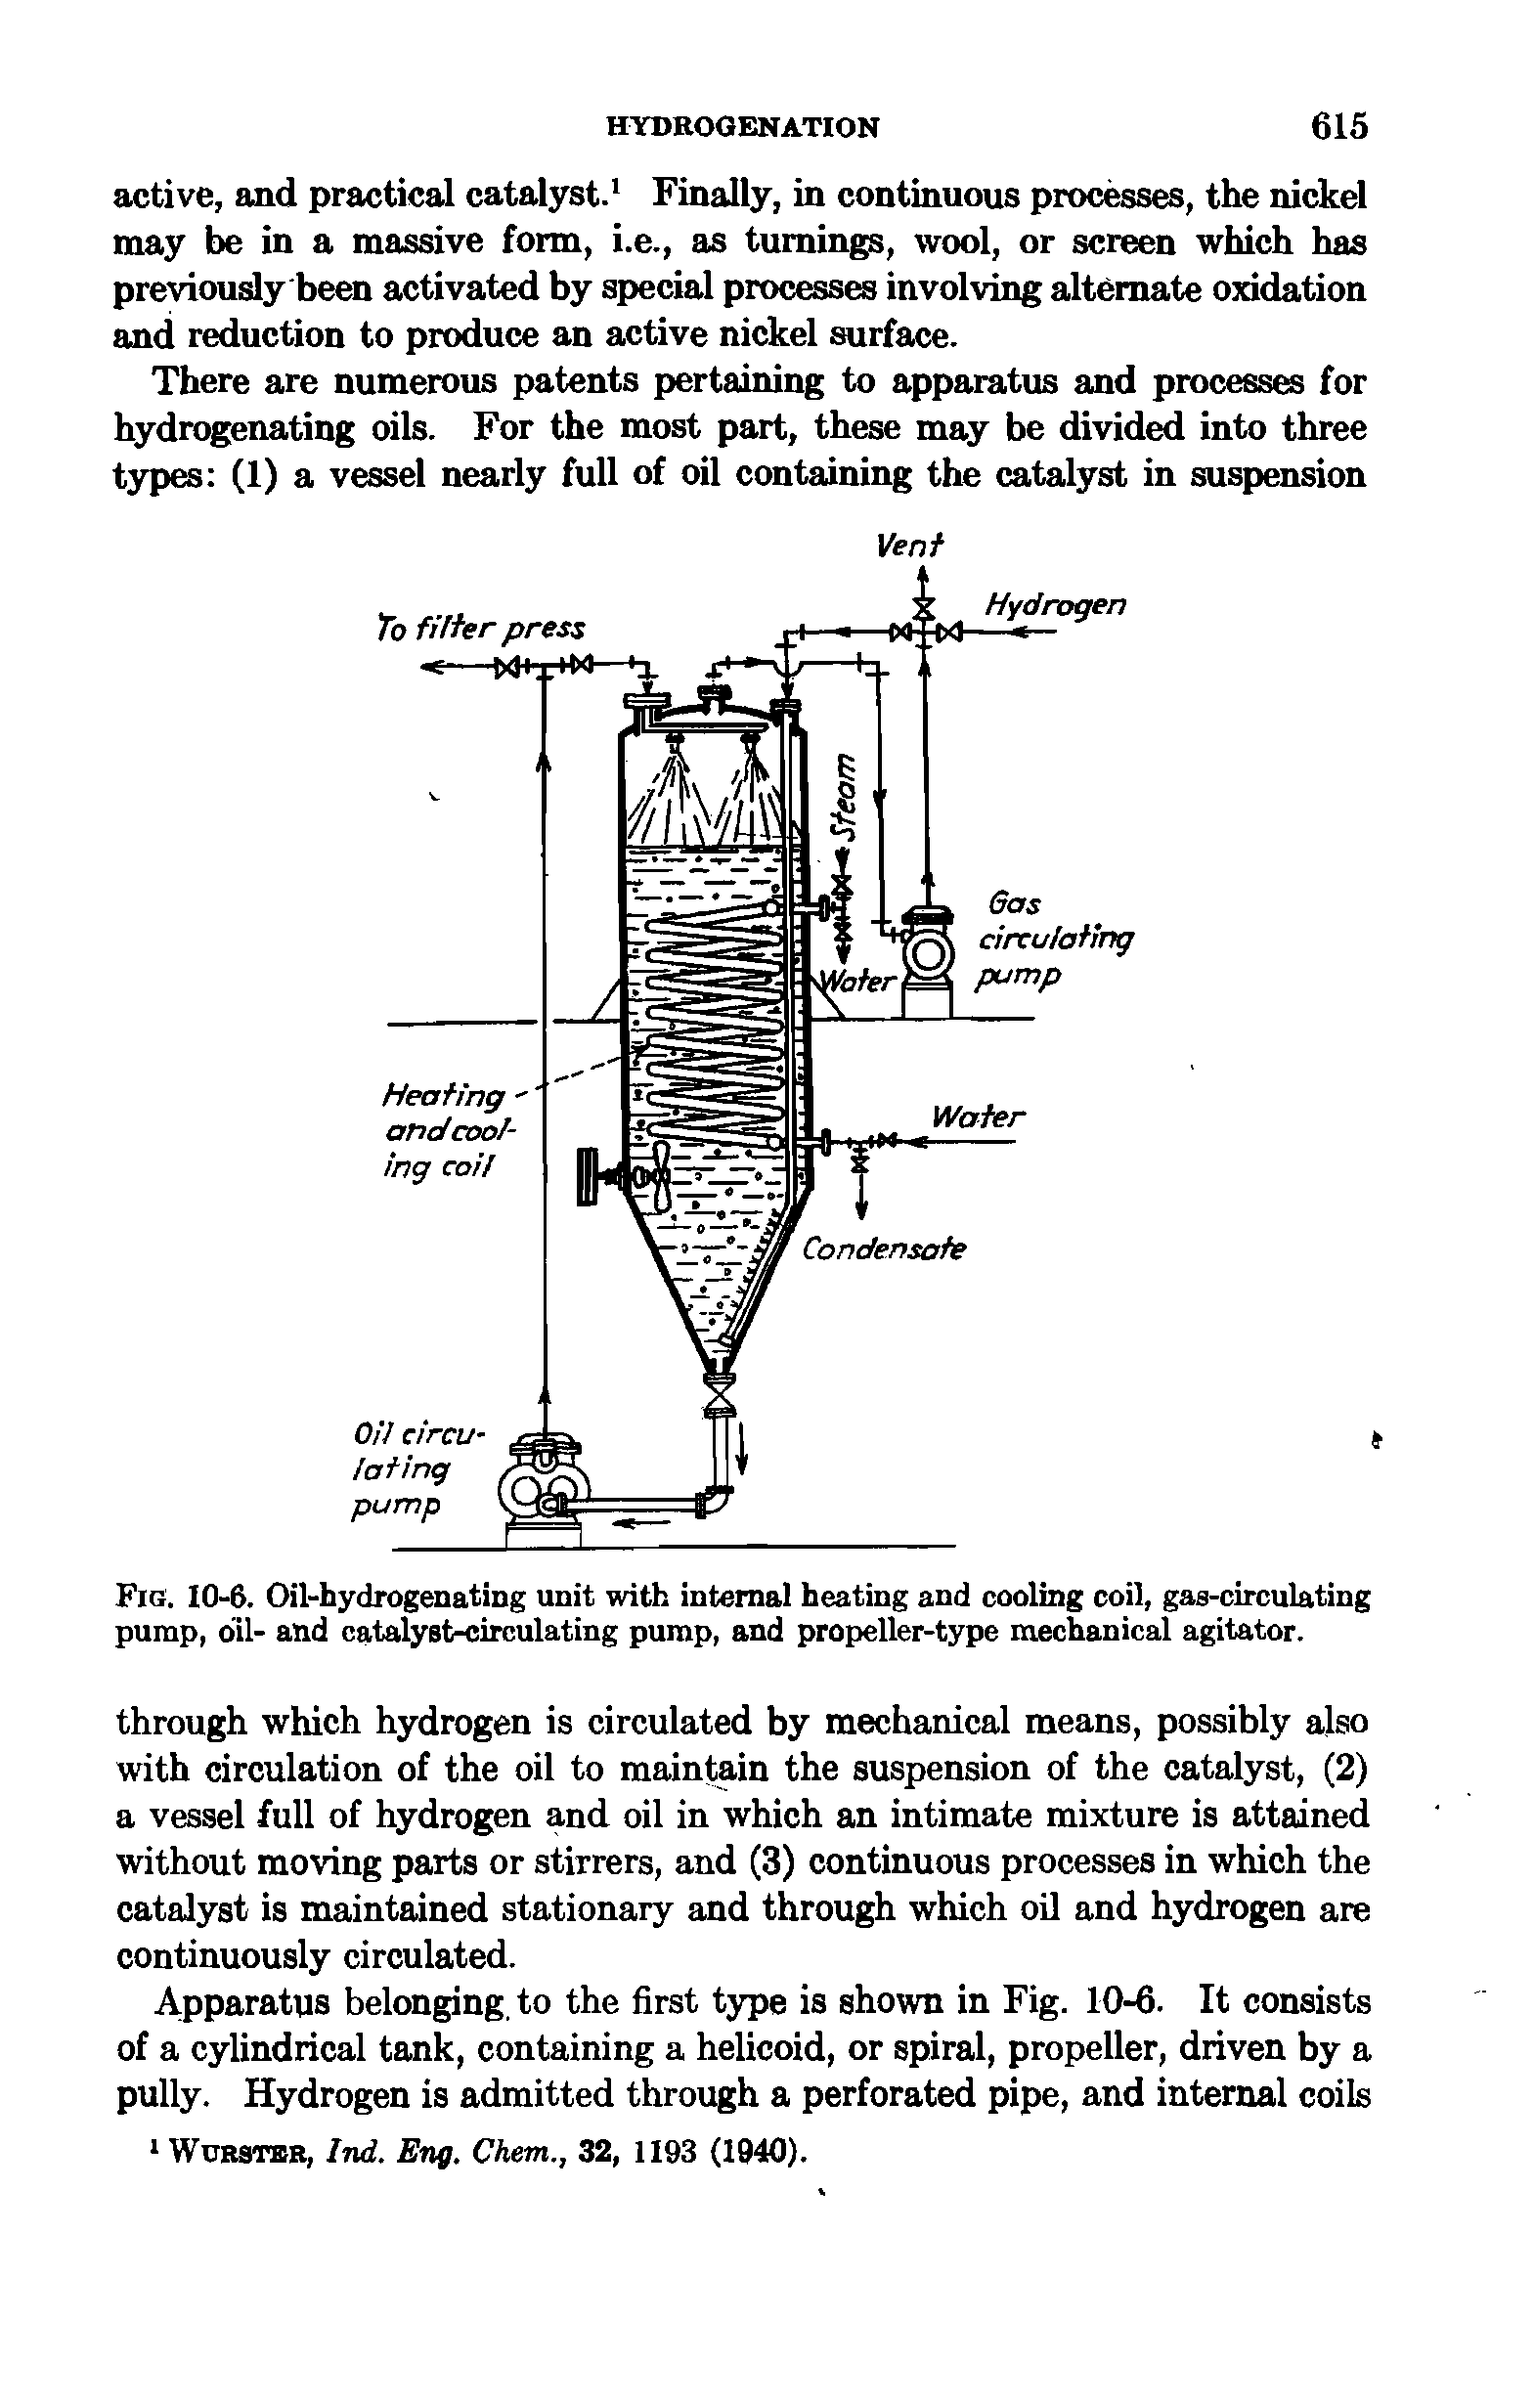 Fig. 10-6. Oil-hydrogenating unit with internal heating and cooling coil, gas-circulating pump, oil- and catalyst-circulating pump, and propeller-type mechanical agitator.